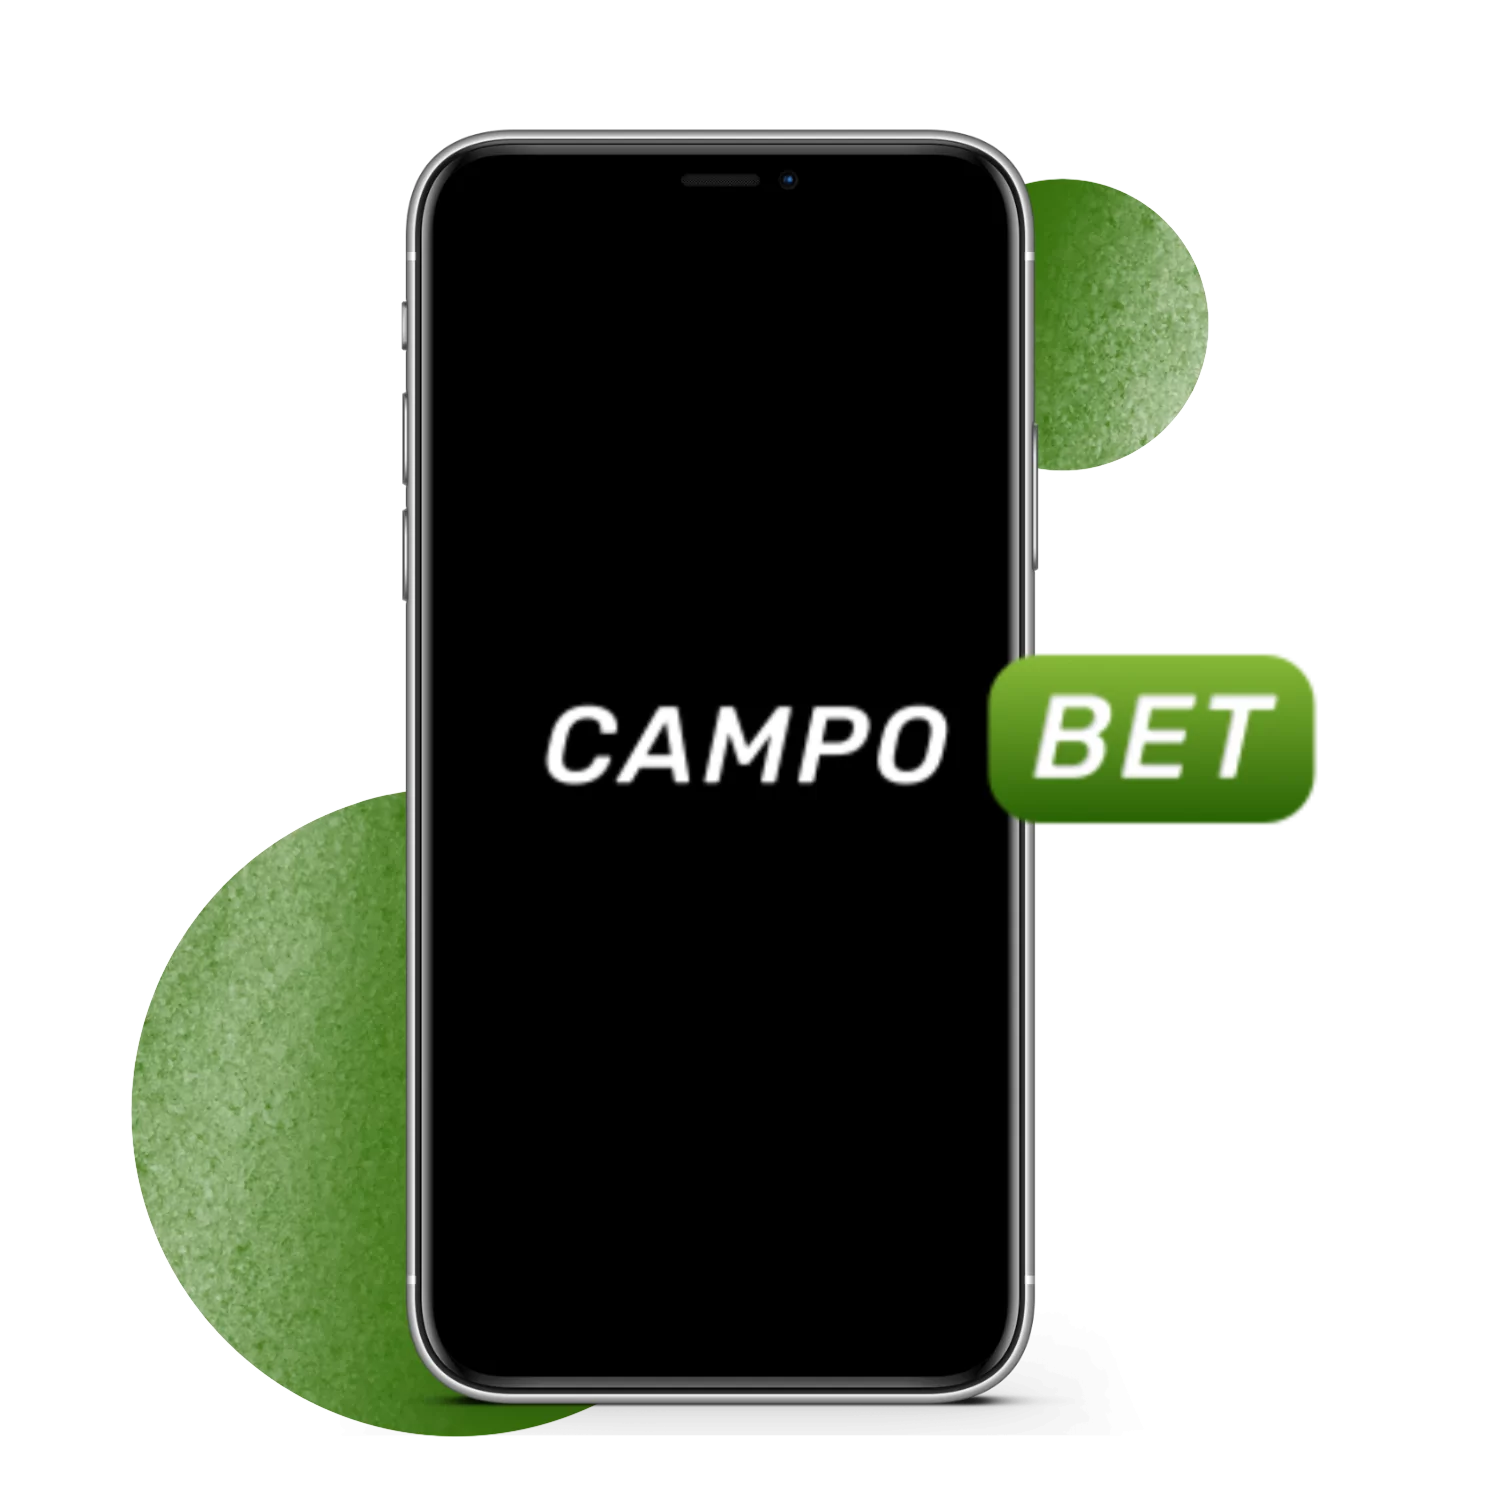 Install the Campobet app to place bets wherever you want.